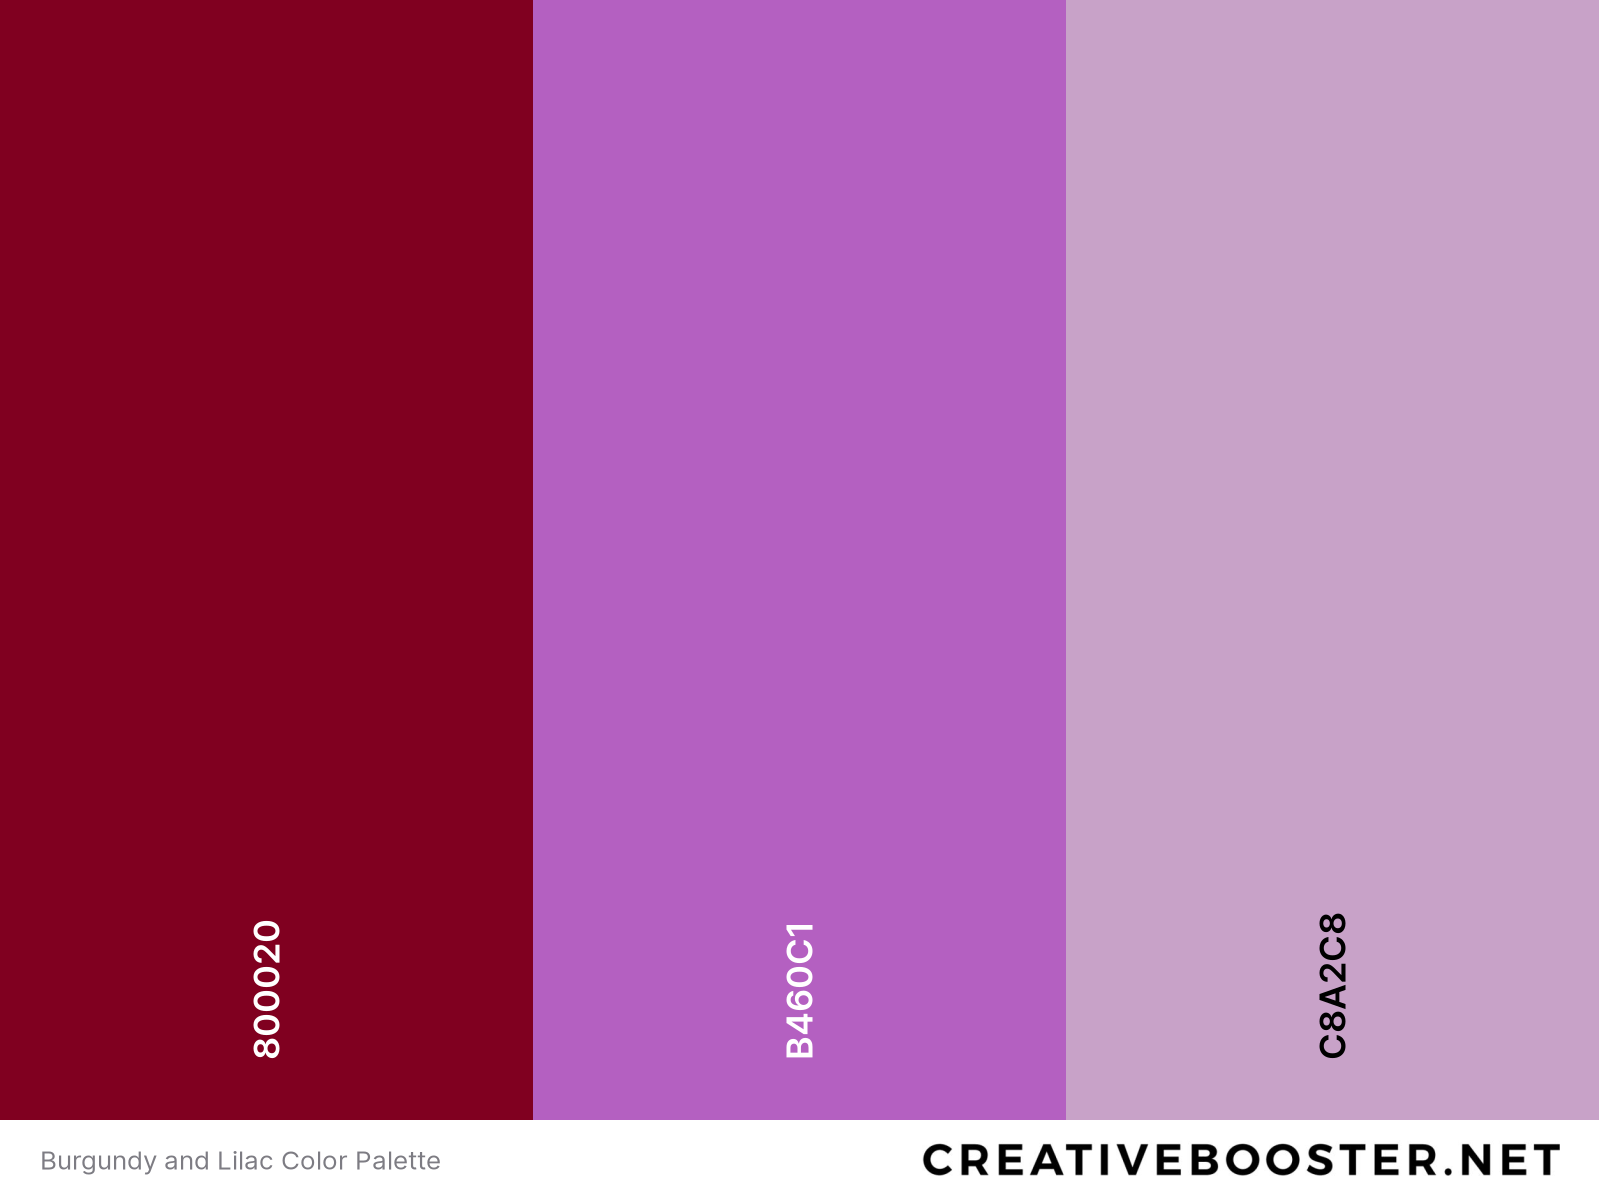 Burgundy and Lilac Color Palette